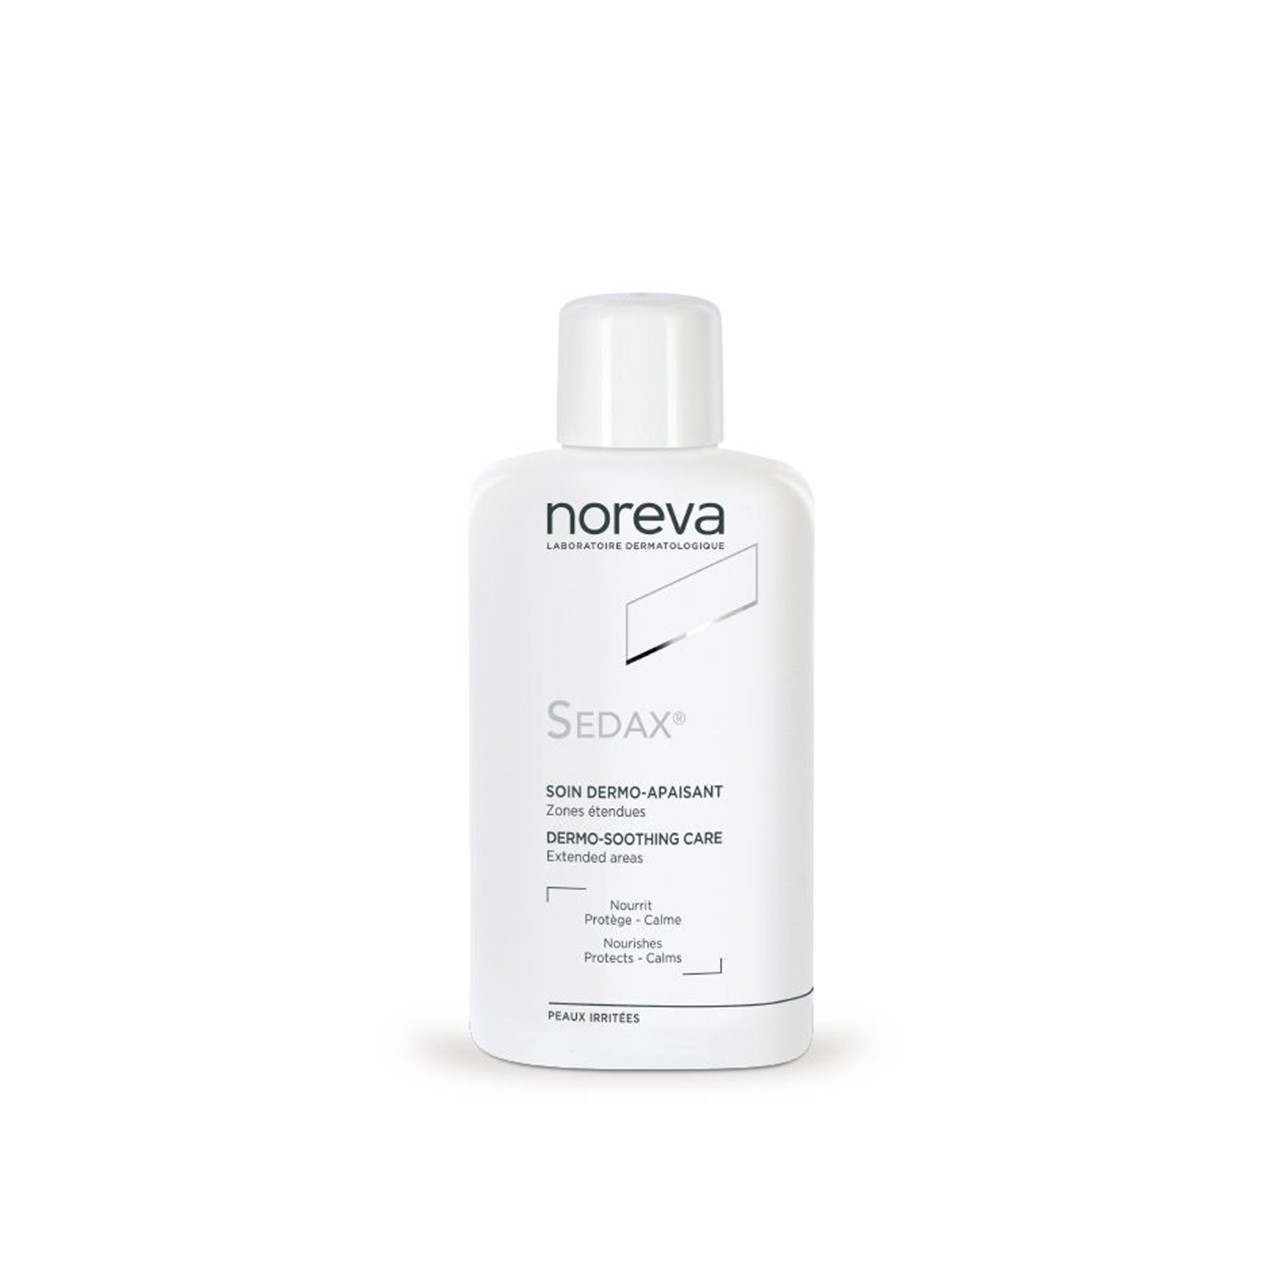 Noreva Sedax Dermo-Soothing Care Extended Areas 125ml (4.23fl oz)